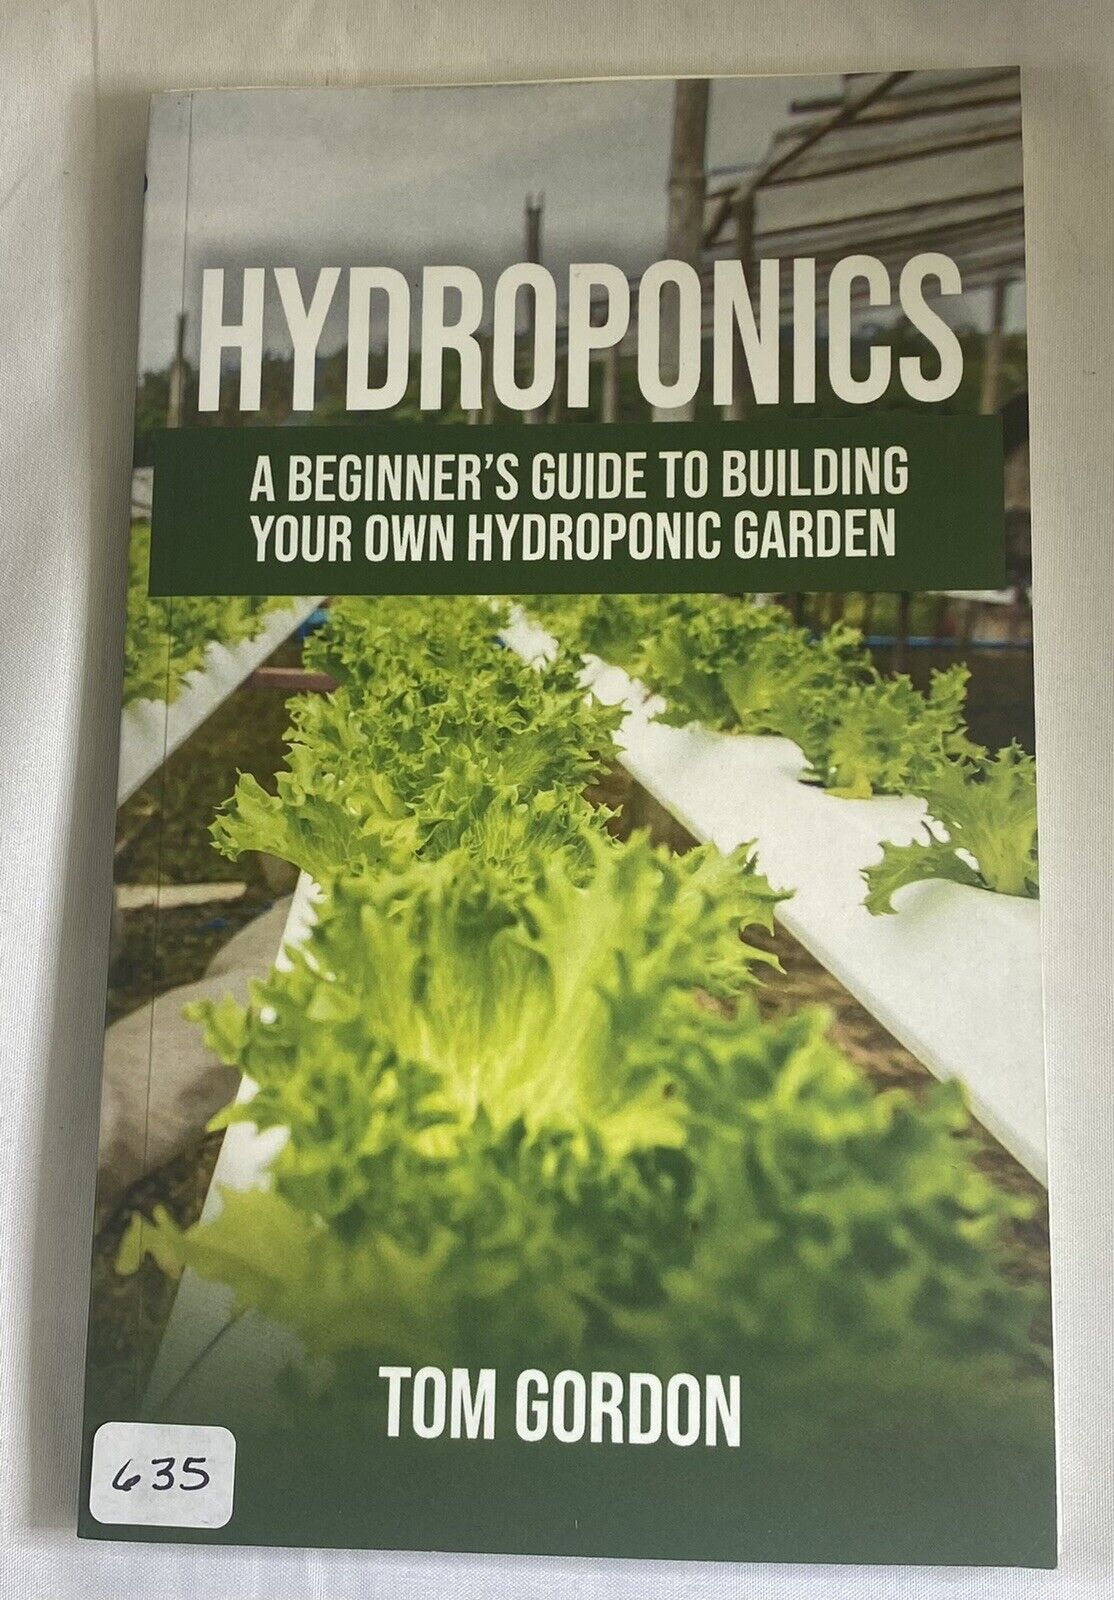 Hydroponics A Beginners Guide To Building Your Own Hydroponic Garden Tom Gordon